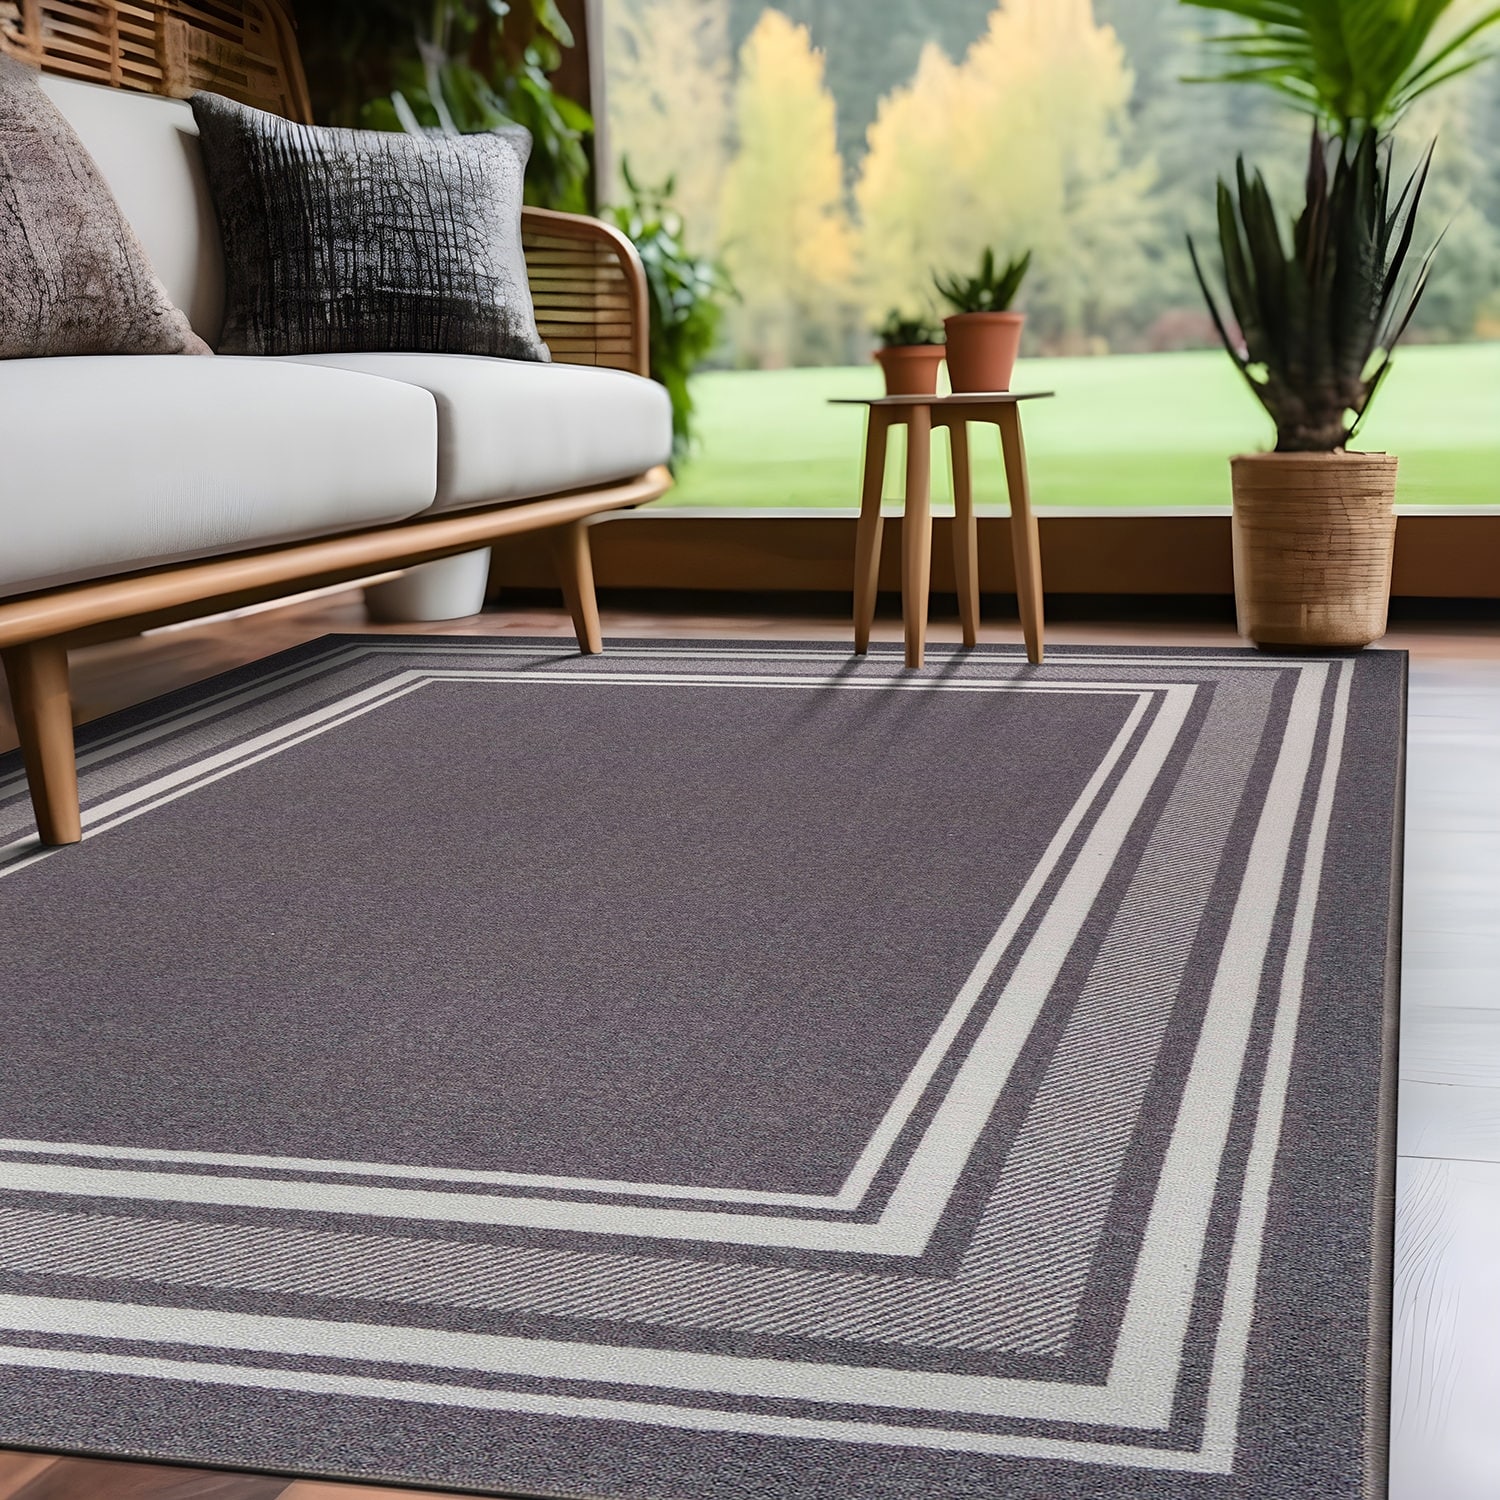 Beverly Rug Indoor Bordered Area Rugs, Non Slip Rubber Backing Modern Living Room Area Rug, Gray, 2x5, Size: 2'x5' Runner